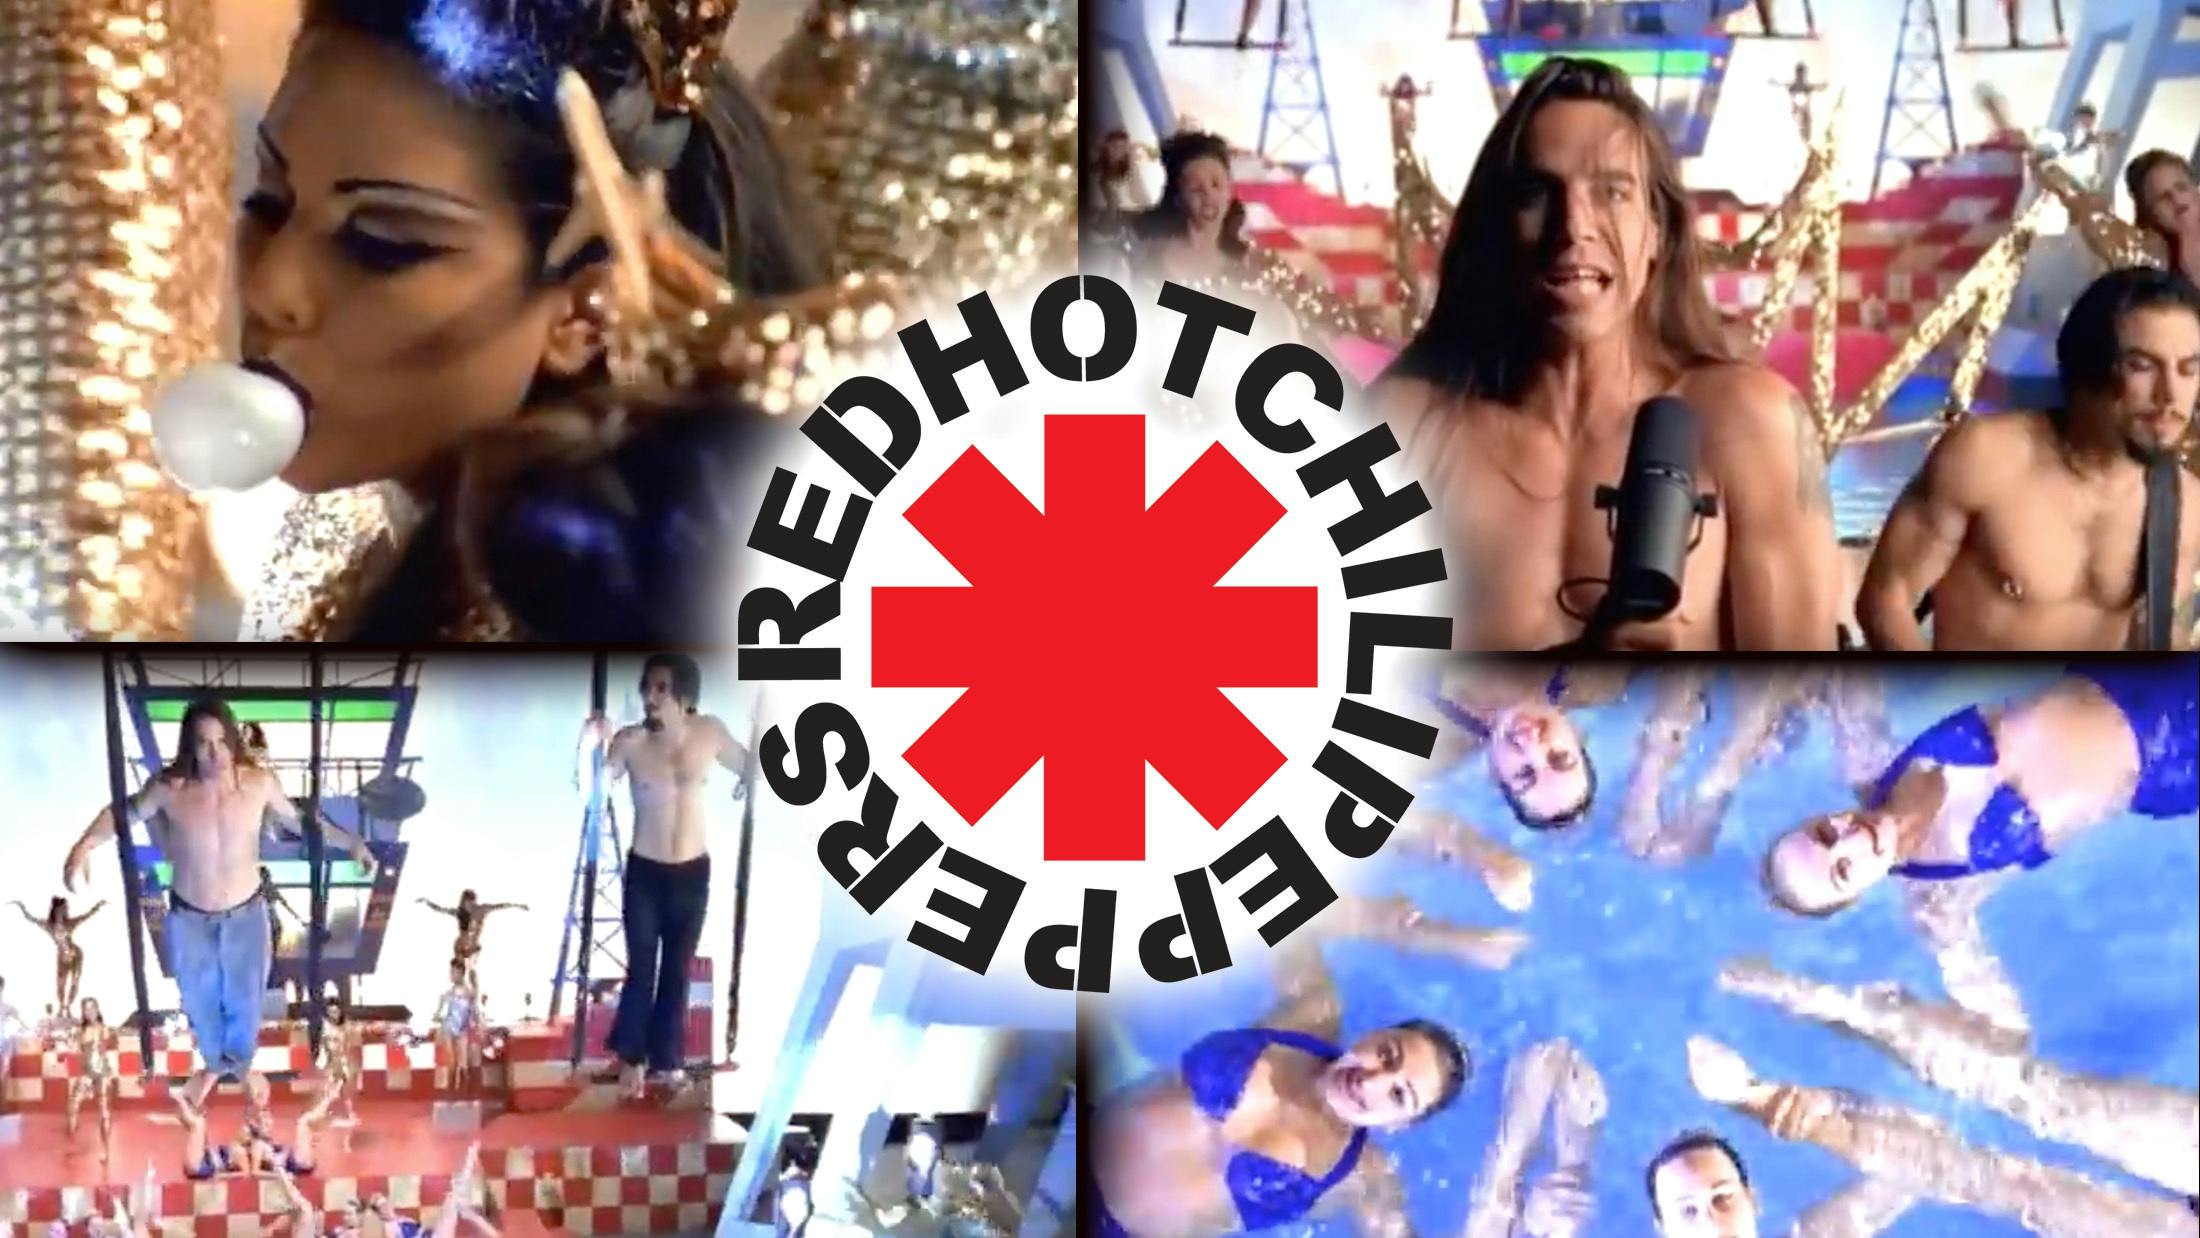 A Deep Dive Into Red Hot Chili Peppers' Aeroplane Video